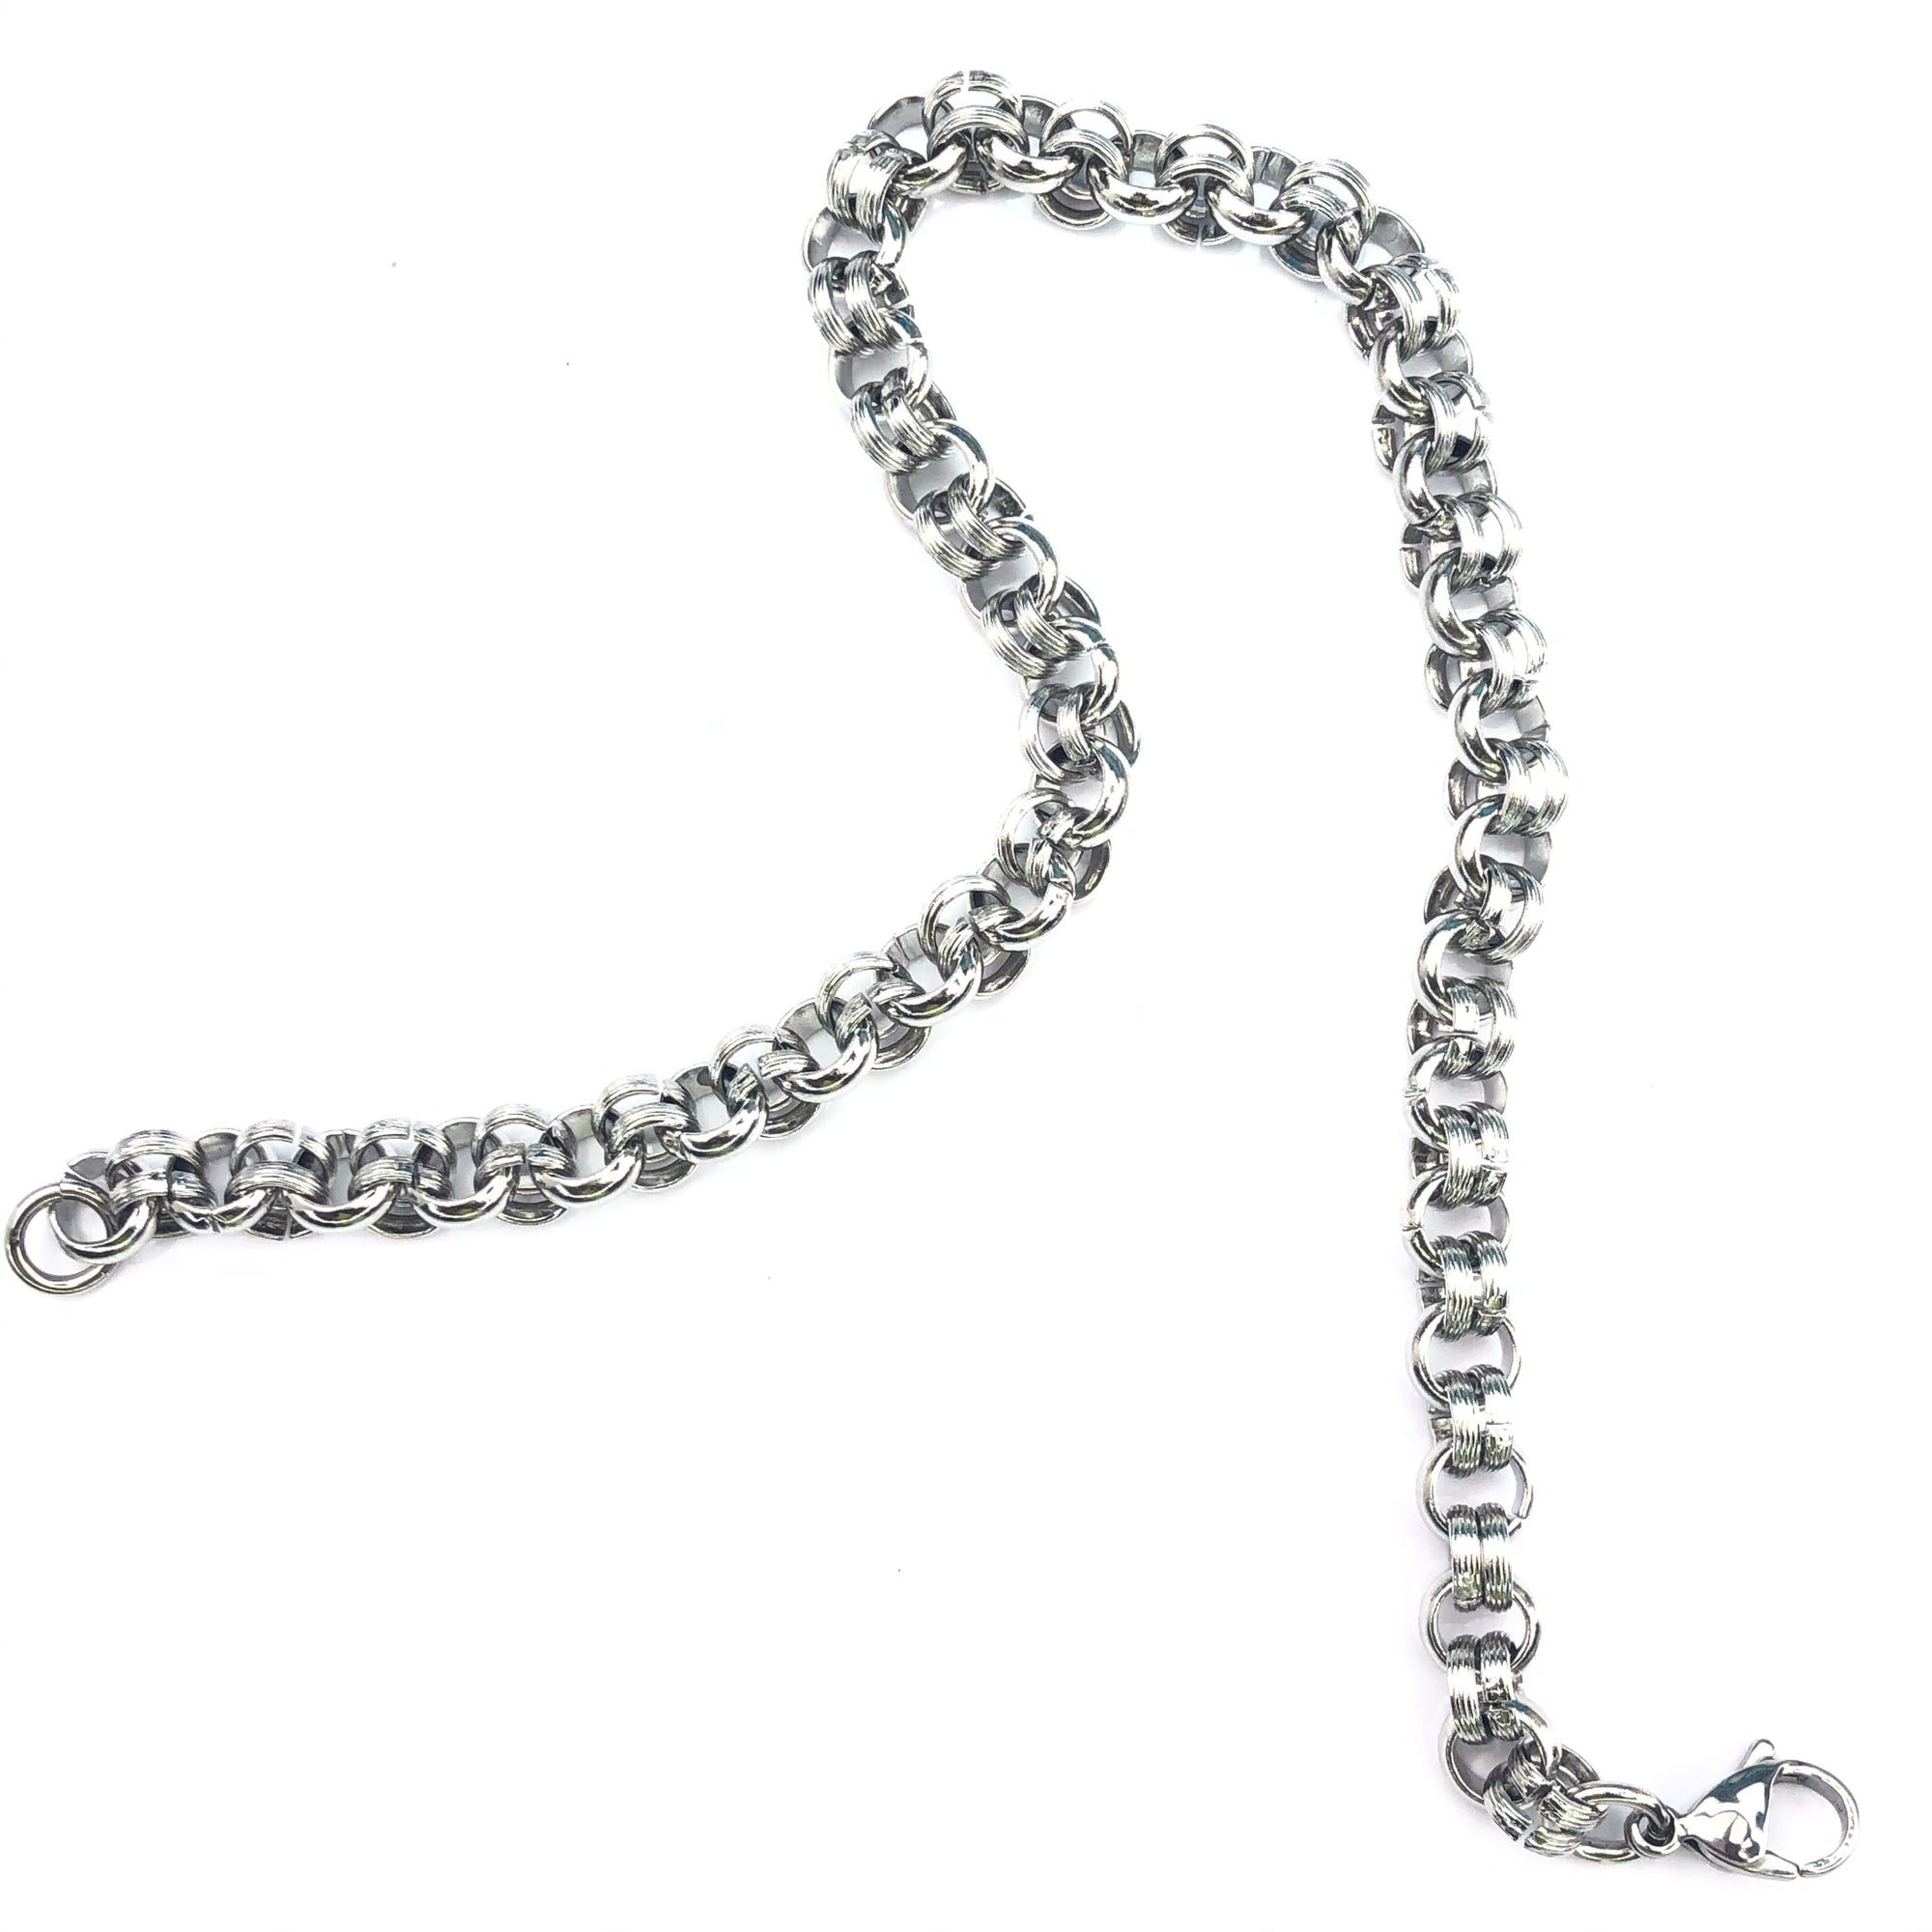 EXT13946 Large Extension Chain Cerese D, Inc. 12"  